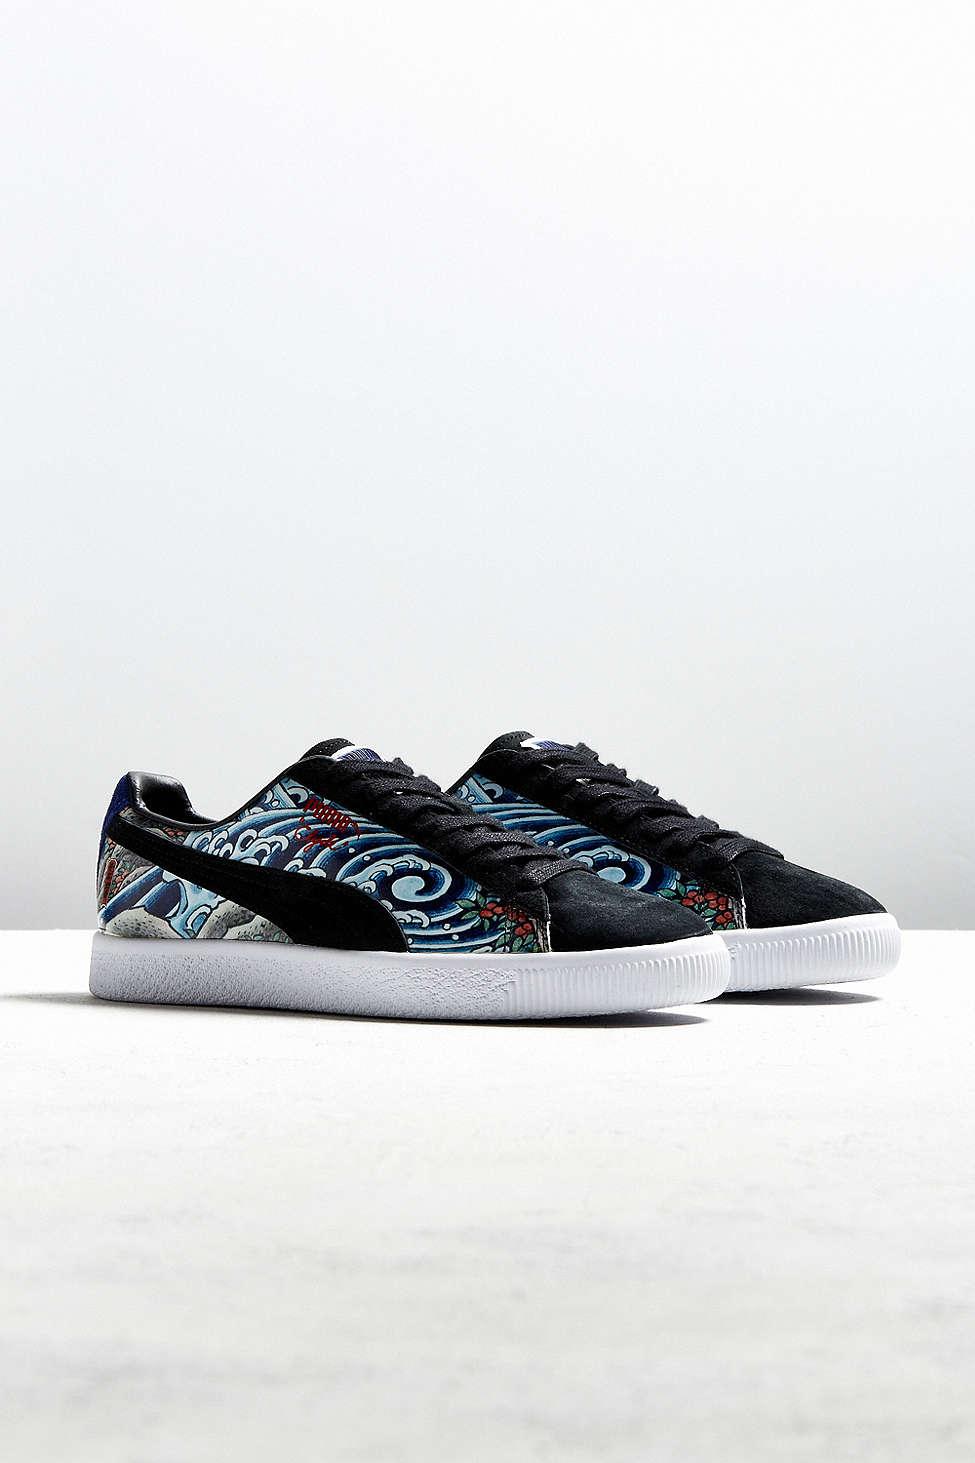 PUMA Leather X Atmos Clyde Three Tides Tattoo Sneaker for Men - Lyst